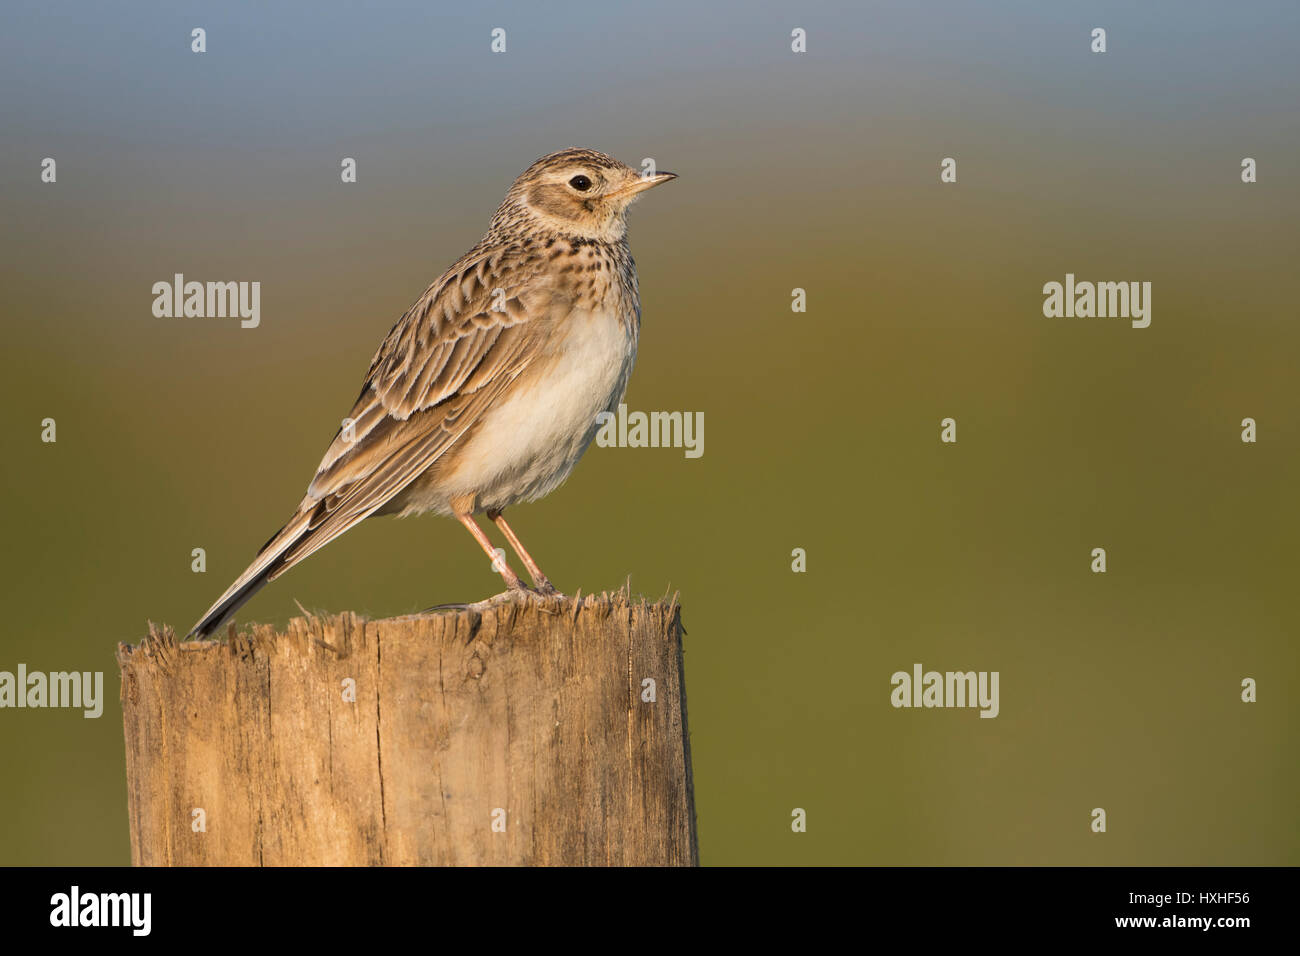 A Common Skylark (Aluada arvensis) perched on post in early morning light, Rye Harbour nature reserve, East Sussex, UK Stock Photo